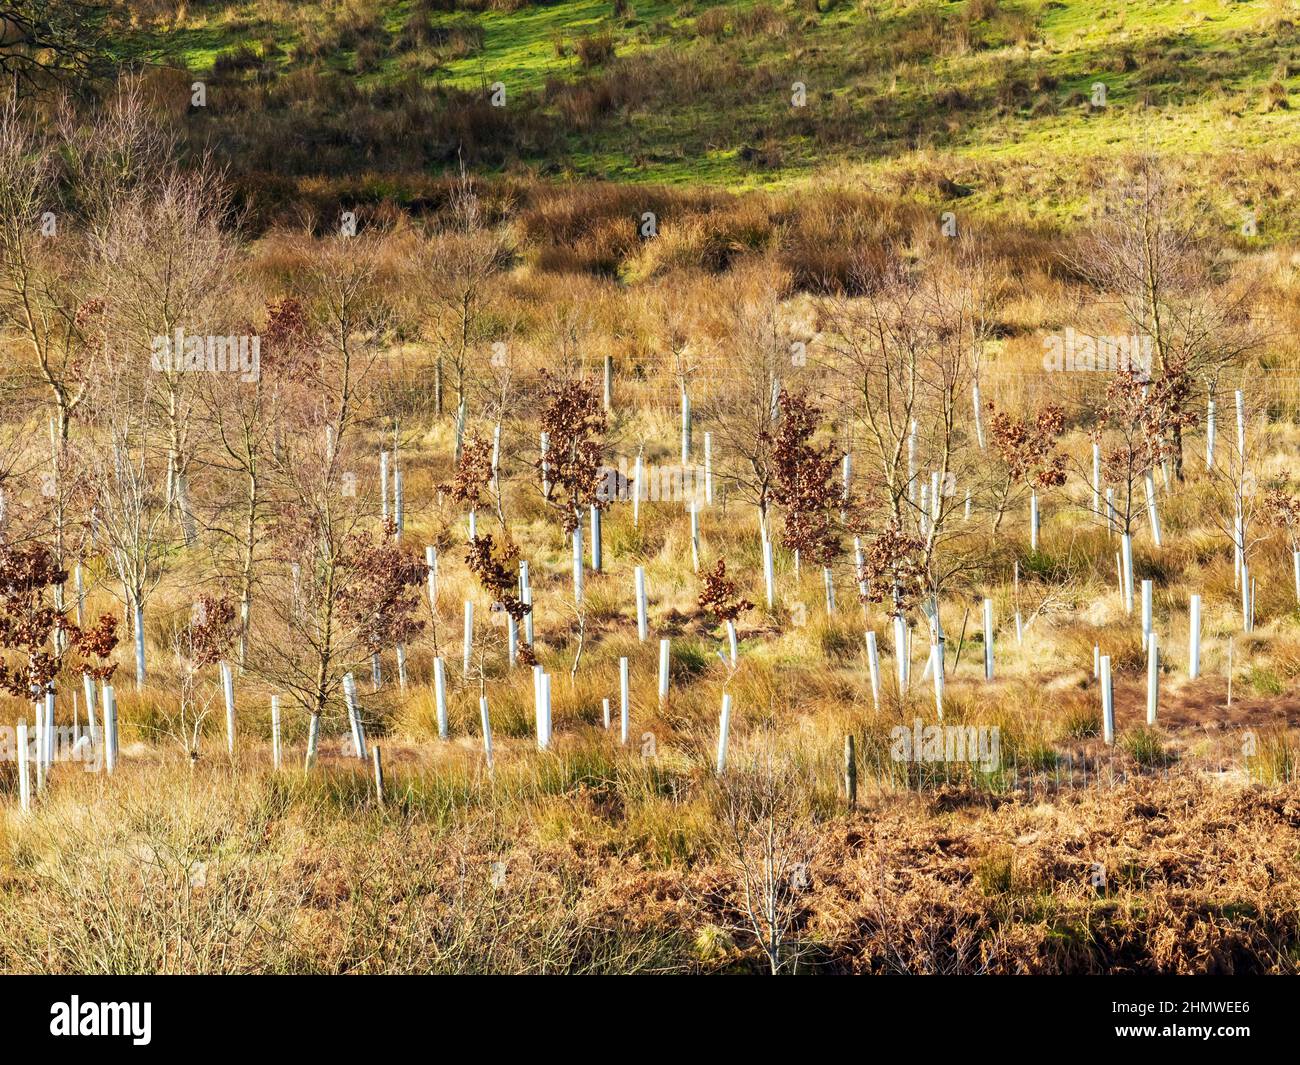 Tree planting at Stocks reservoir in the Forest of Bowland, Lancashire, UK. Stock Photo